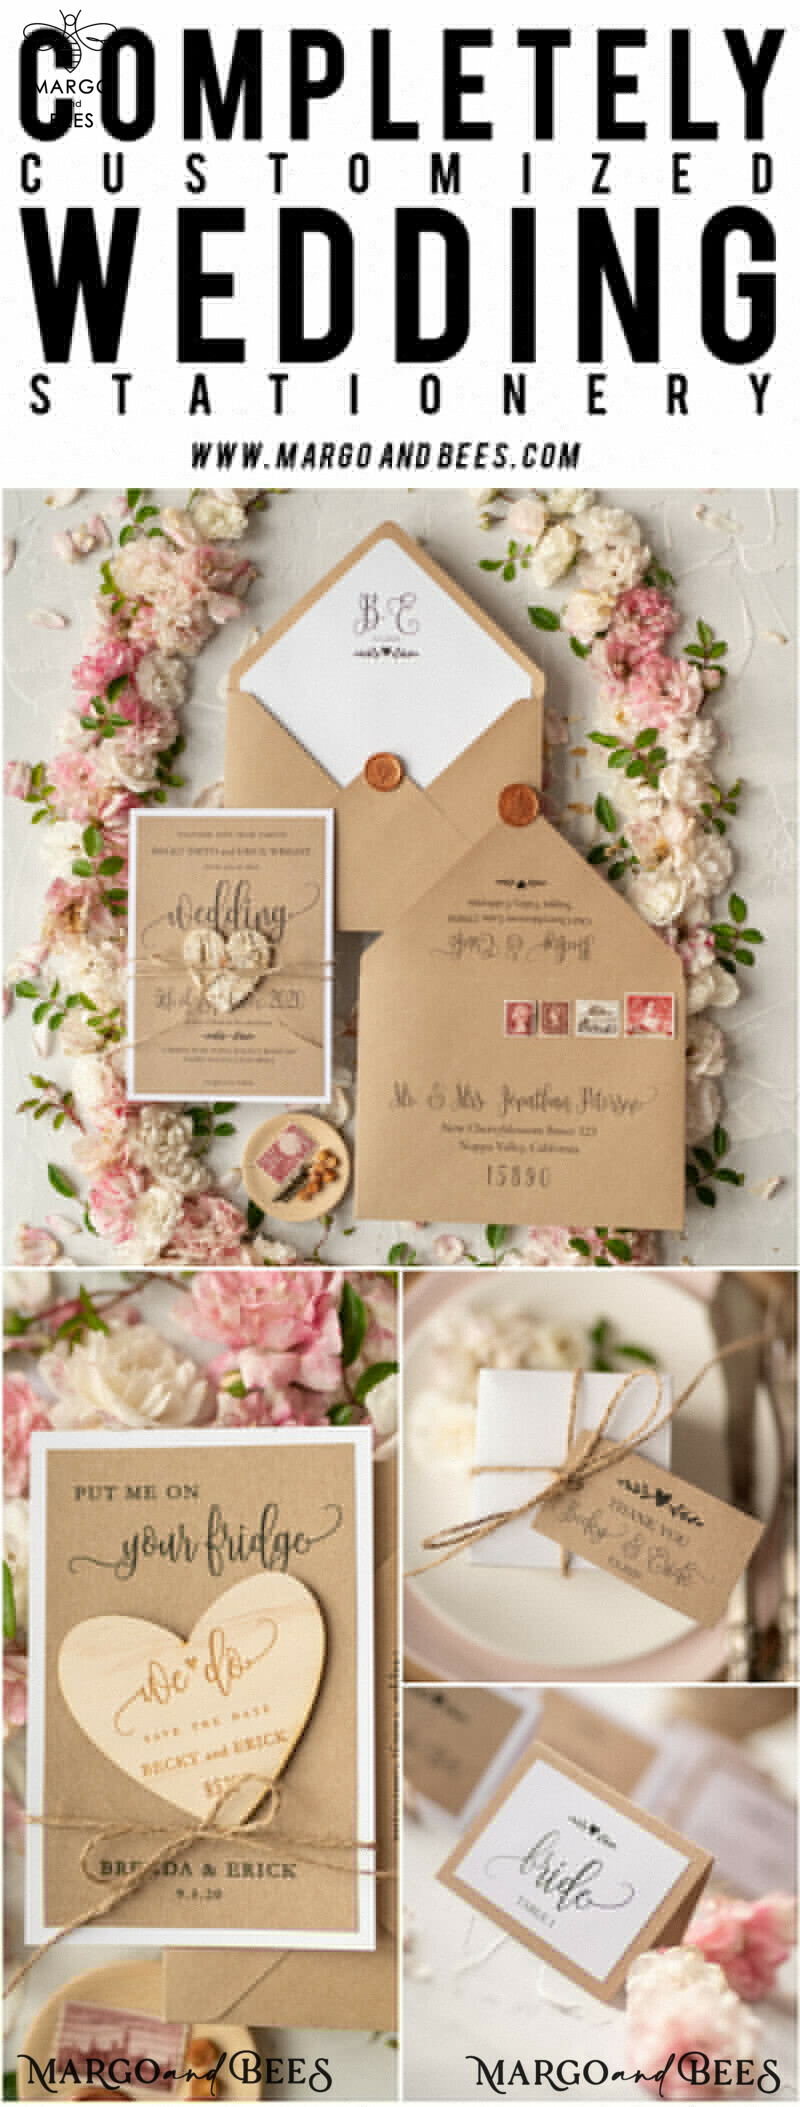 Affordable and Handmade Wedding Stationery: Vintage Wooden Wedding Invitations with Elegant Birch Heart Wedding Cards, crafted from Bespoke Eco Paper-20